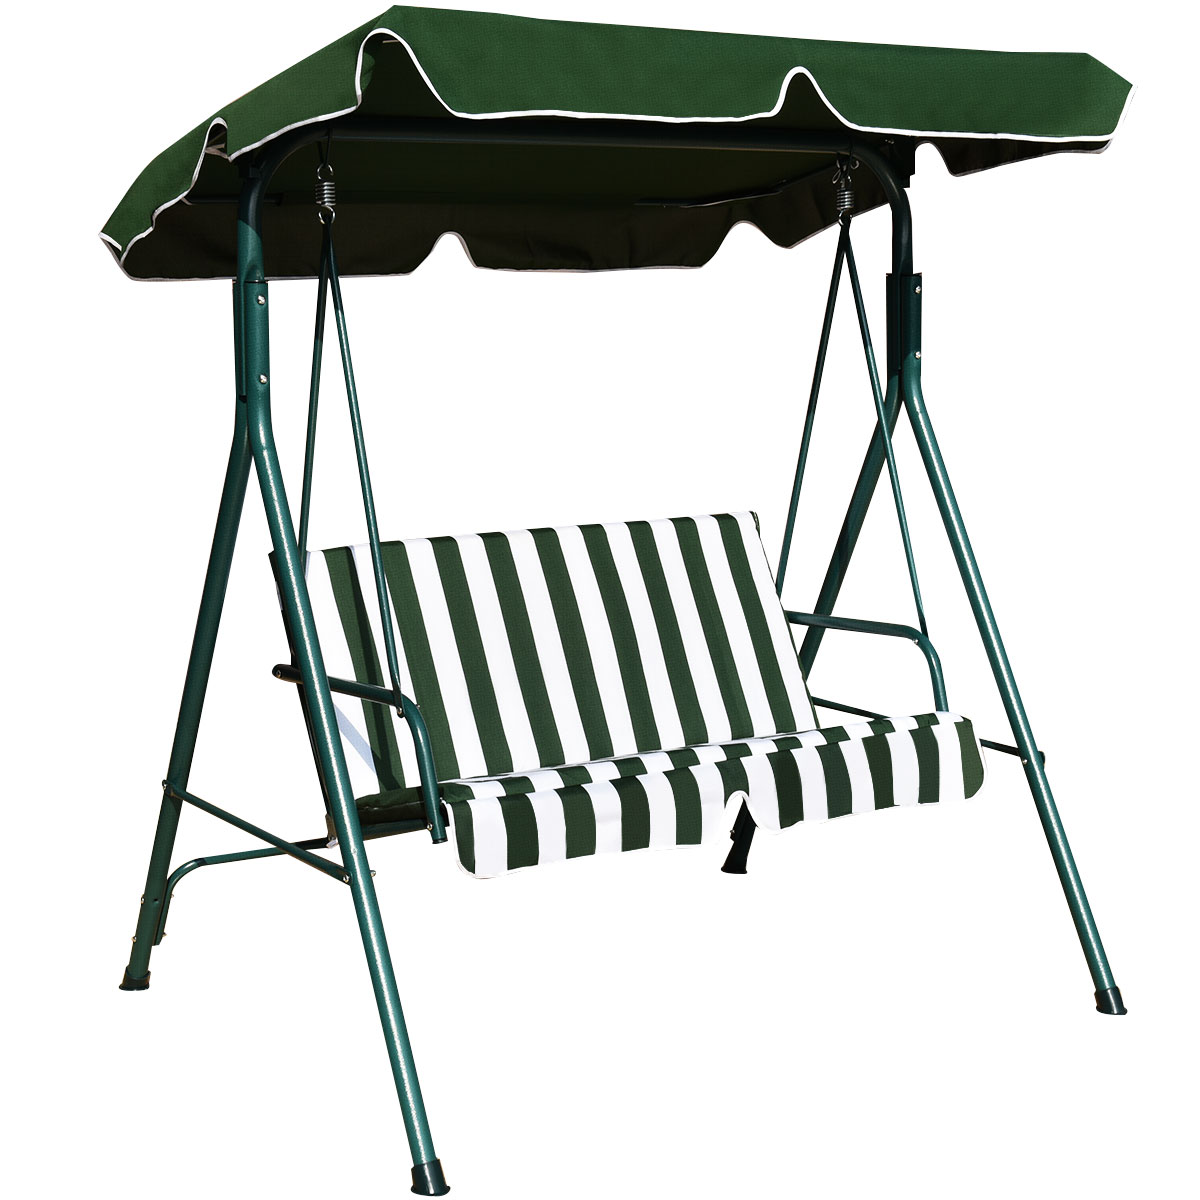 Costway Loveseat Patio Canopy Swing Glider Hammock Cushioned Steel Frame Outdoor Green - image 1 of 7